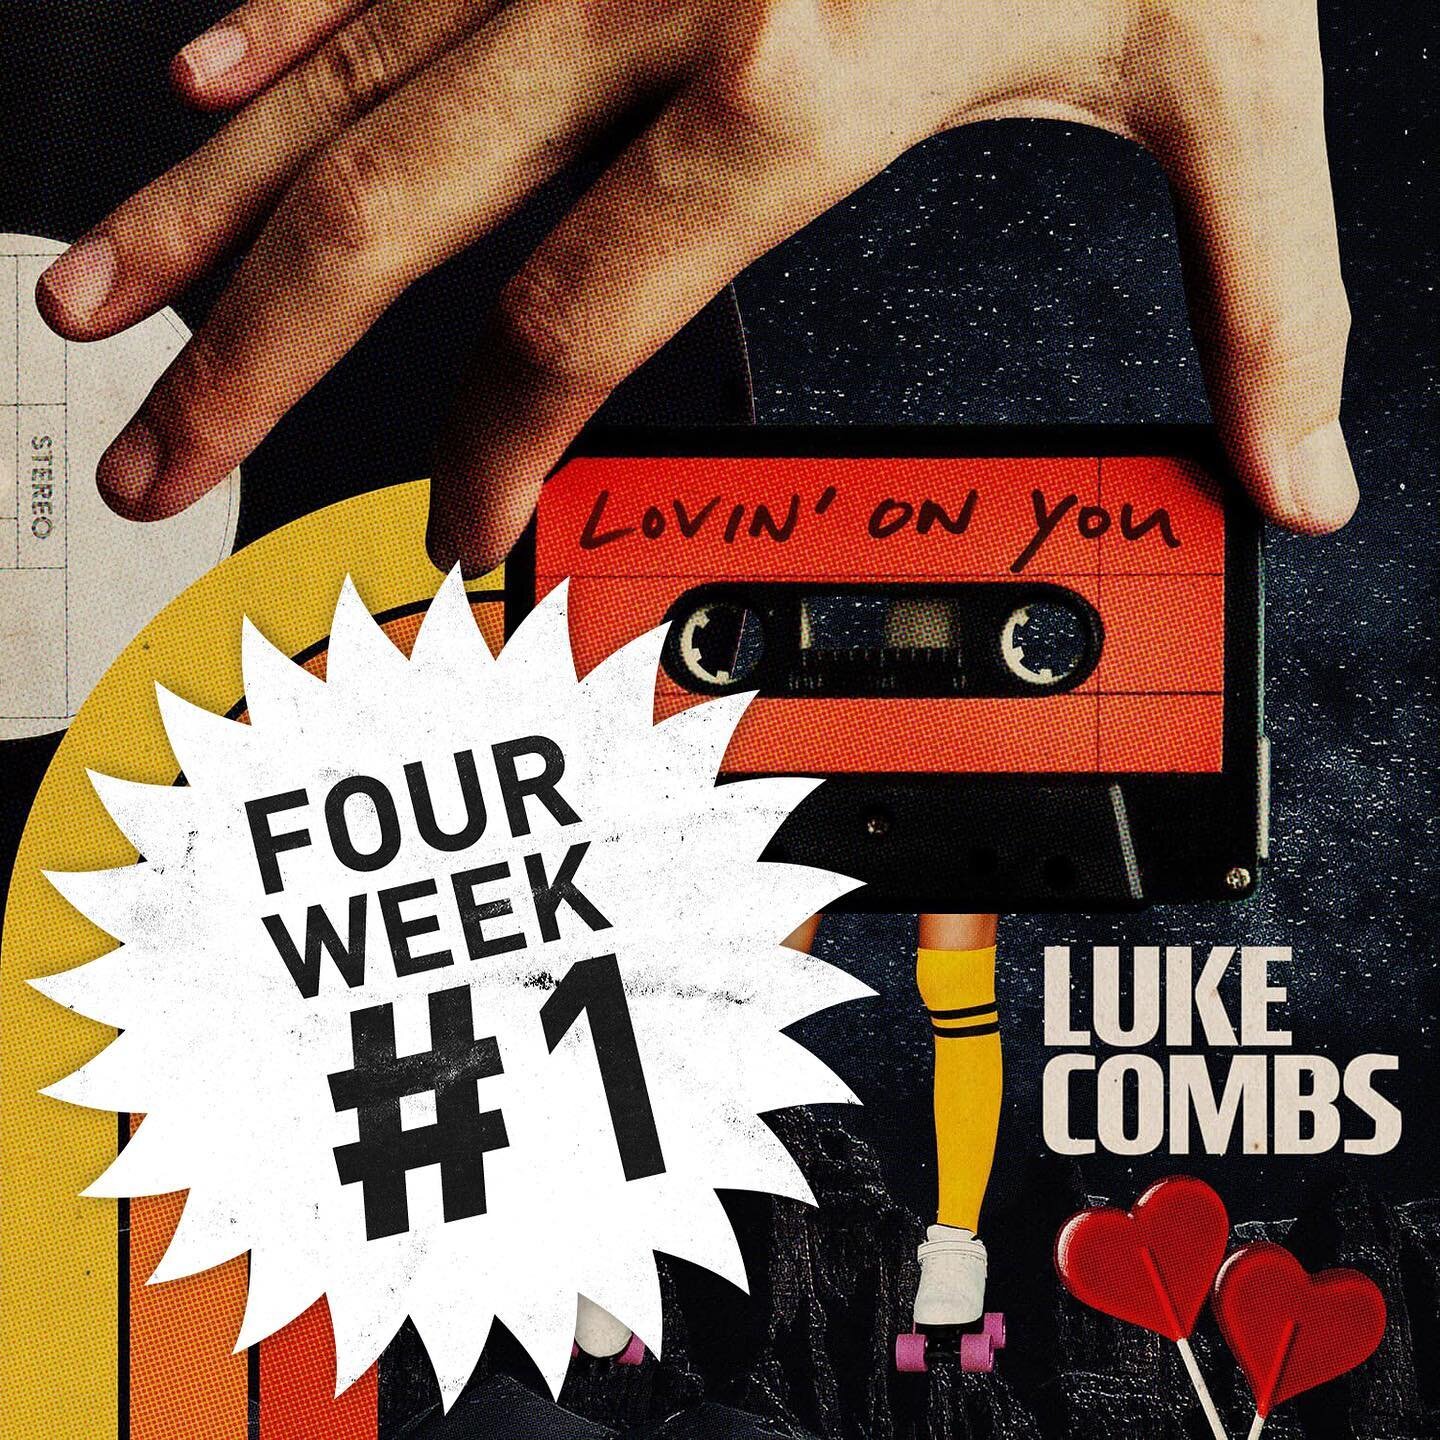 4 WEEK #1 VIBEZ: @lukecombs&rsquo; &ldquo;Lovin&rsquo; On You&rdquo; is #1 for the FOURTH week in a row! CONGRATS to @jamesmcnairmusic and co-writers @lukecombs, @thomasarcher01 &amp; @rayfulchermusic‼️🎉